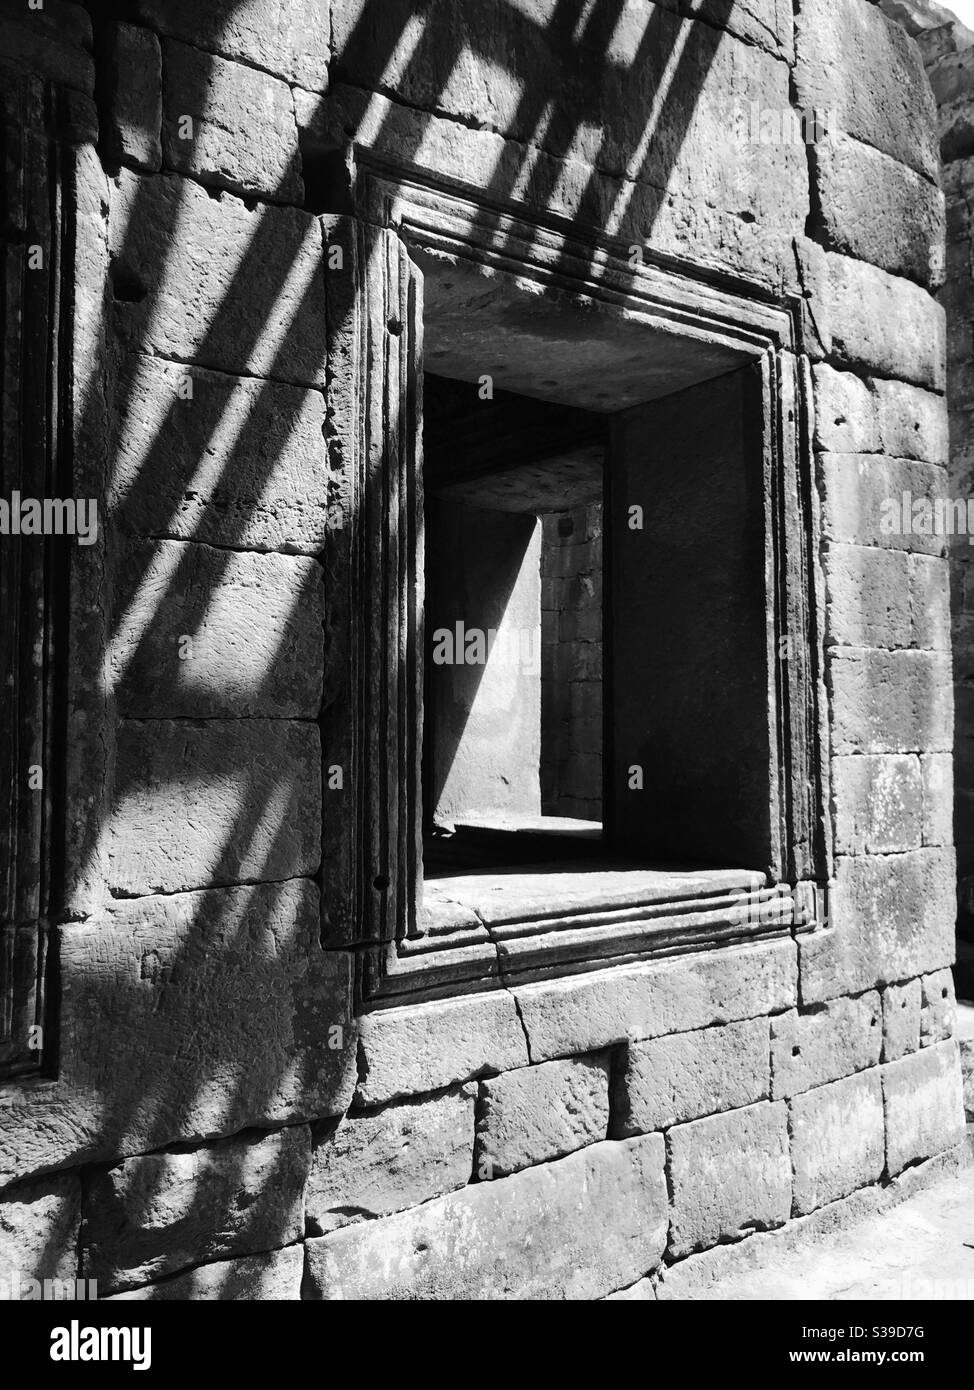 Light and shadow, Window and wall in black and white Stock Photo